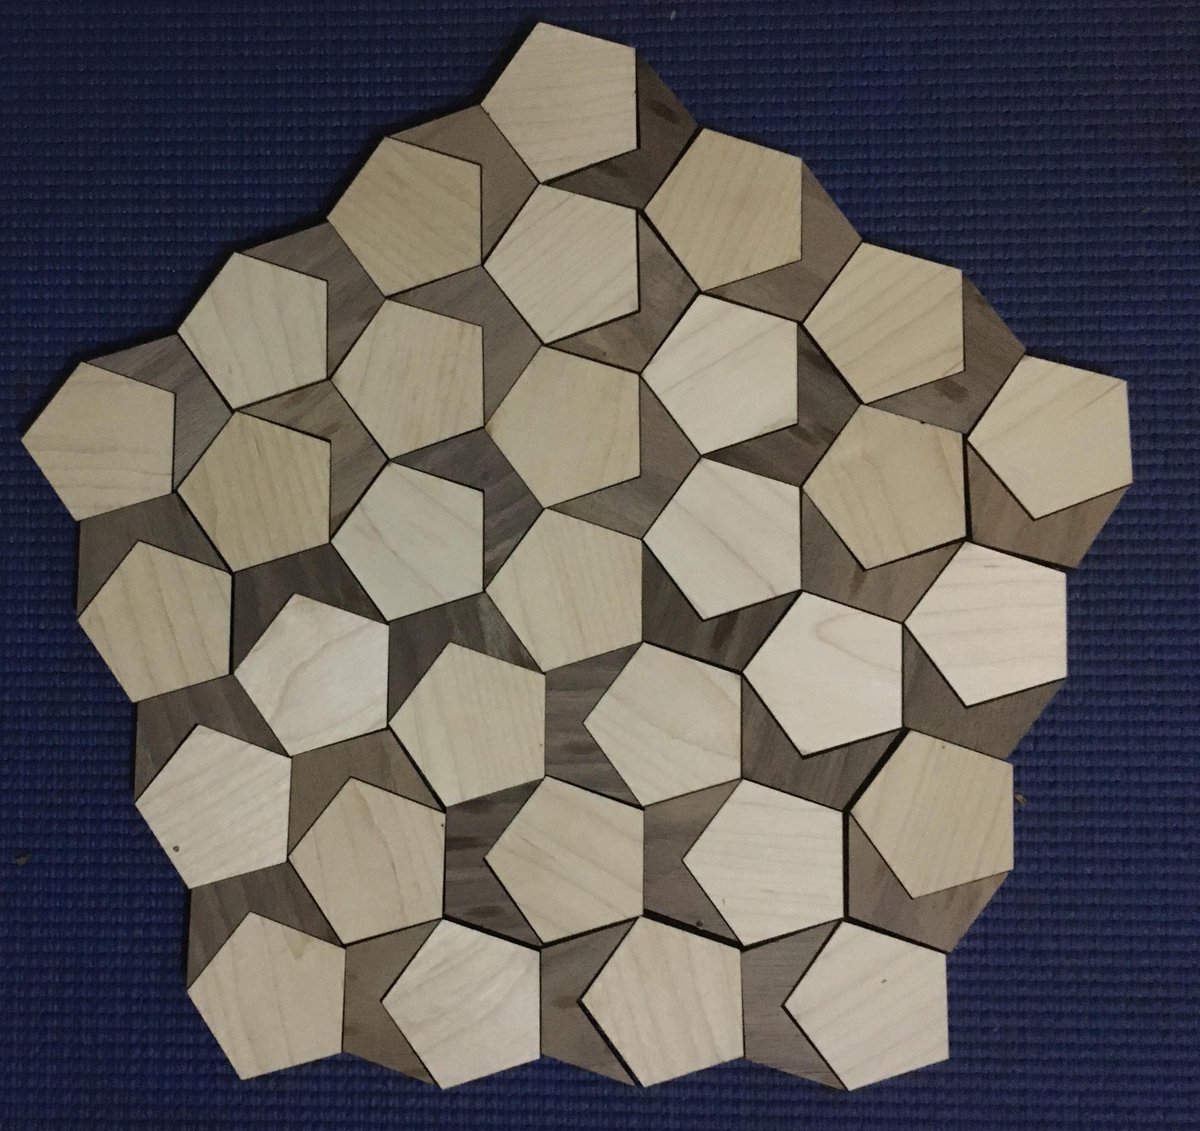 Another tiling of equilateral pentagons, alternating dark concave forms and light convex. I could also use 2 concave pentagons and a wide rhombus.